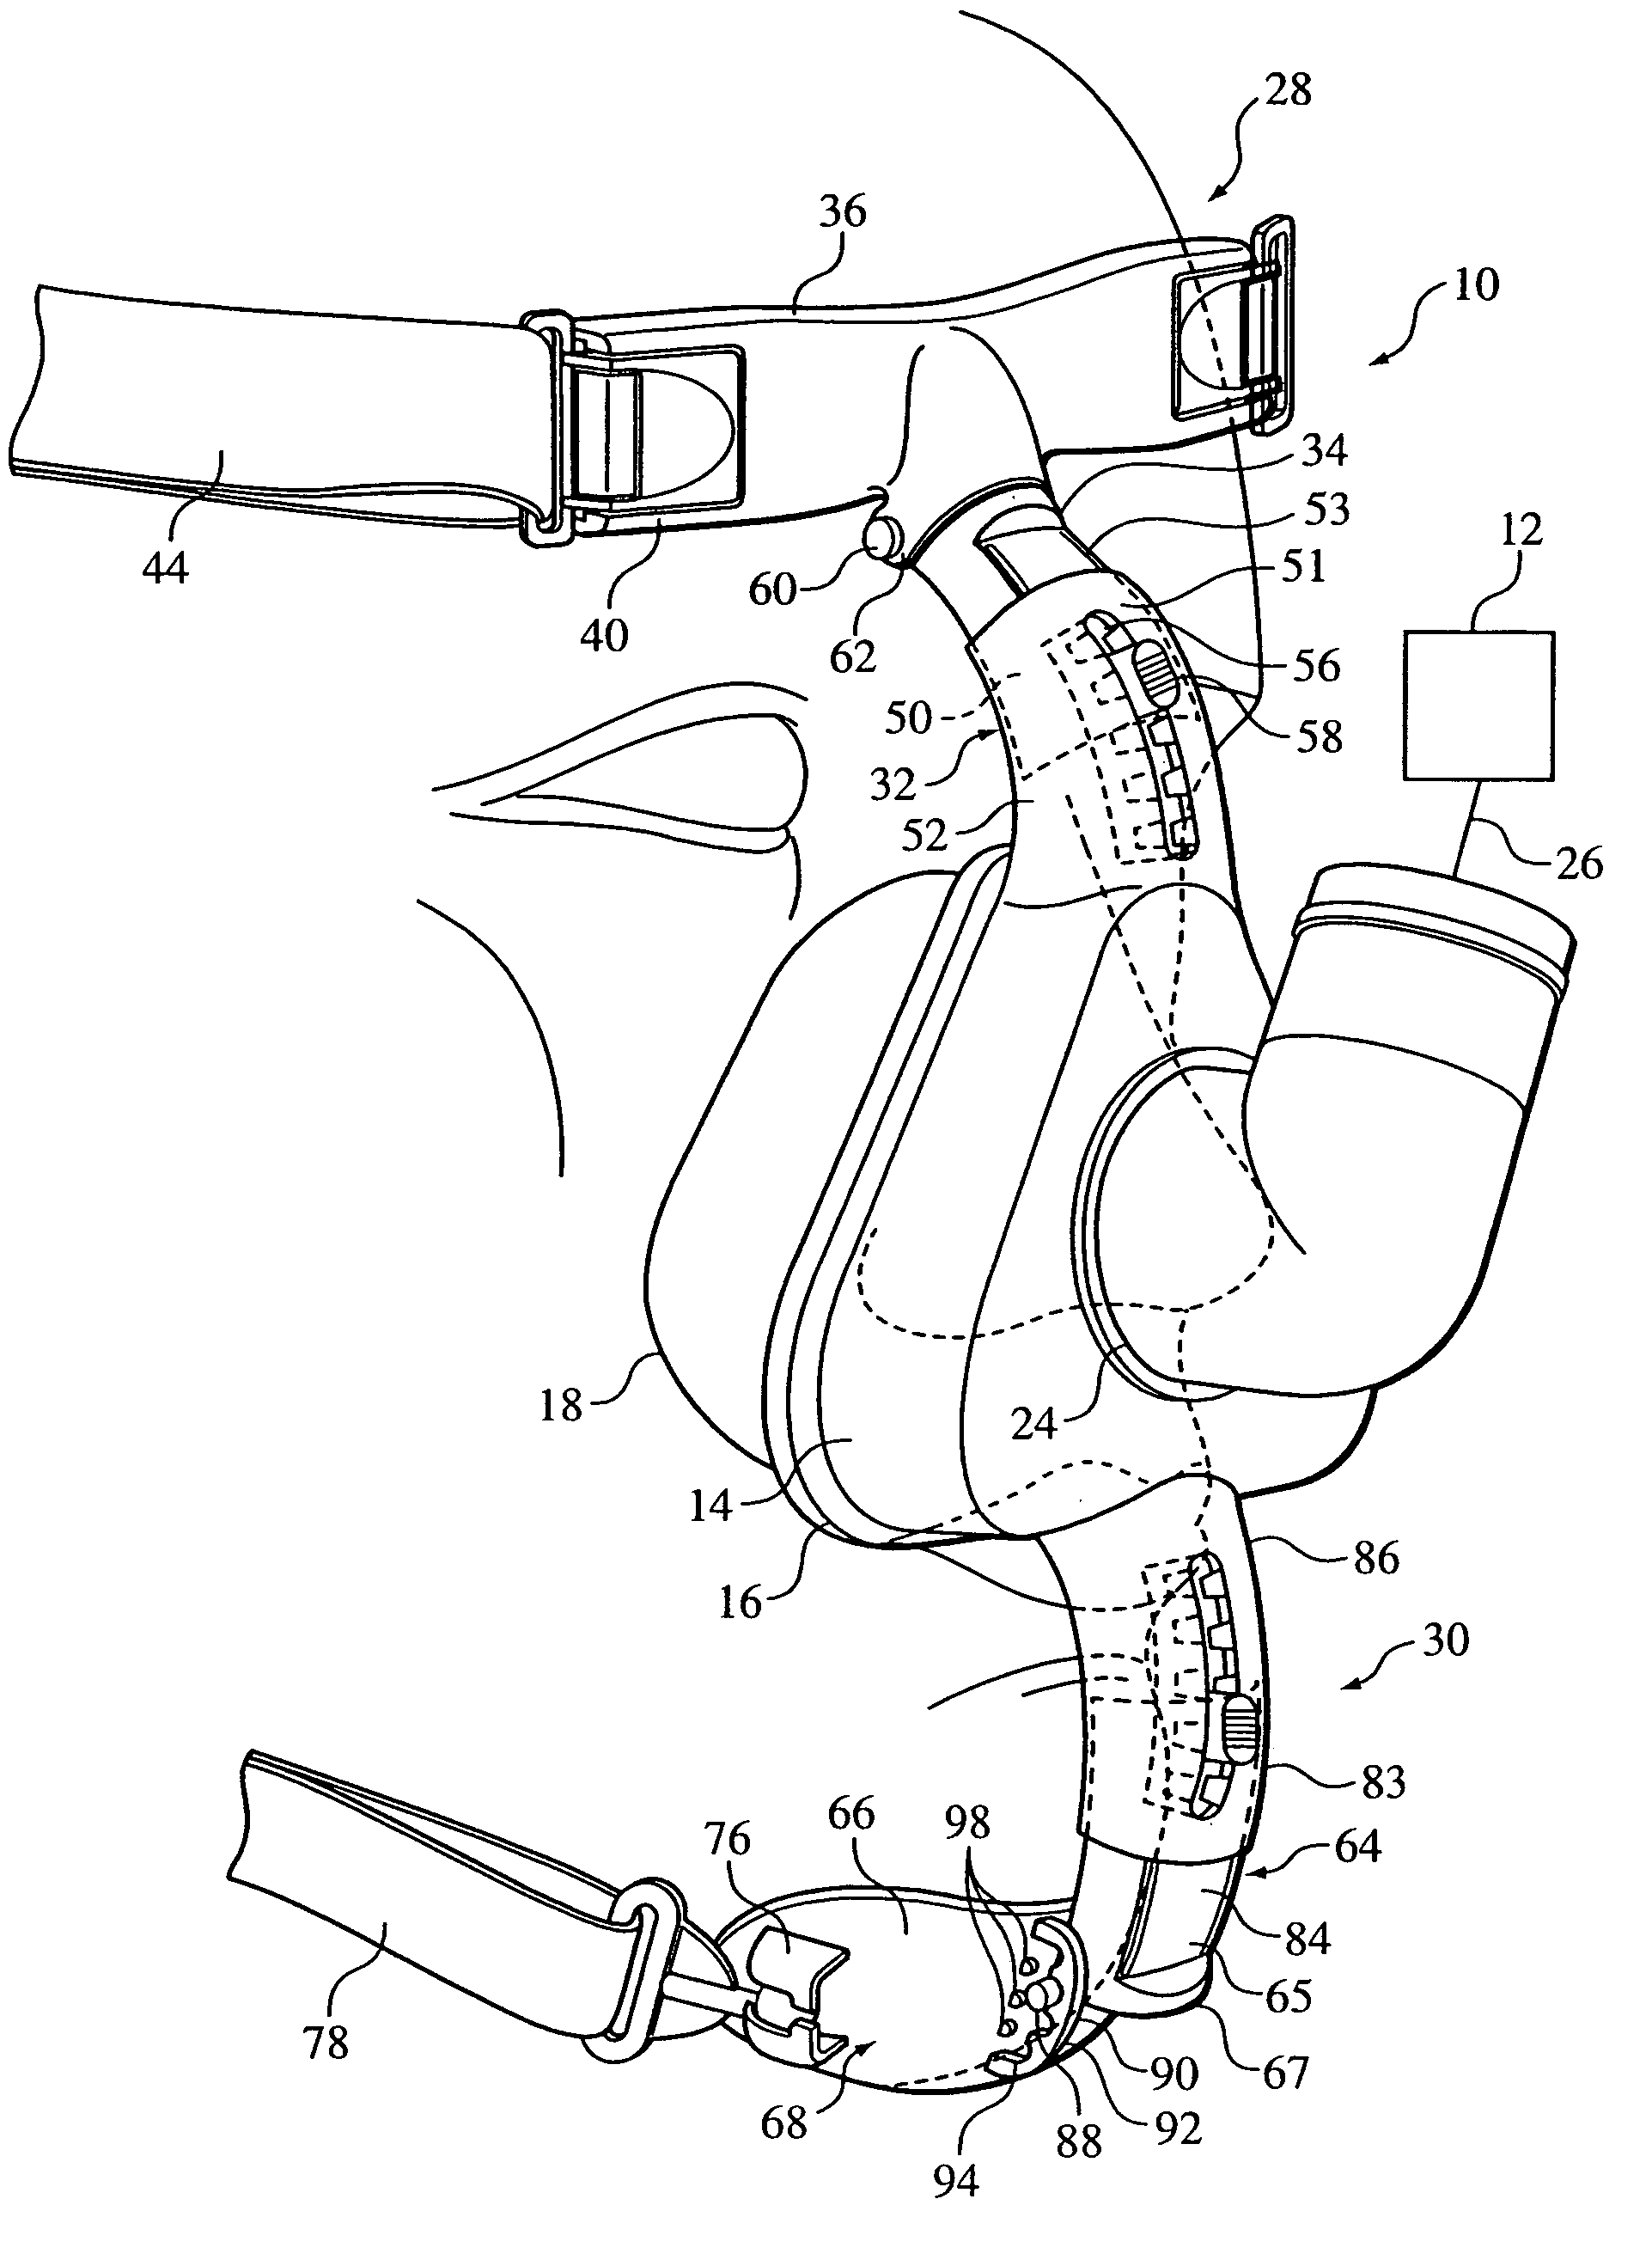 Patient interface with forehead and chin support